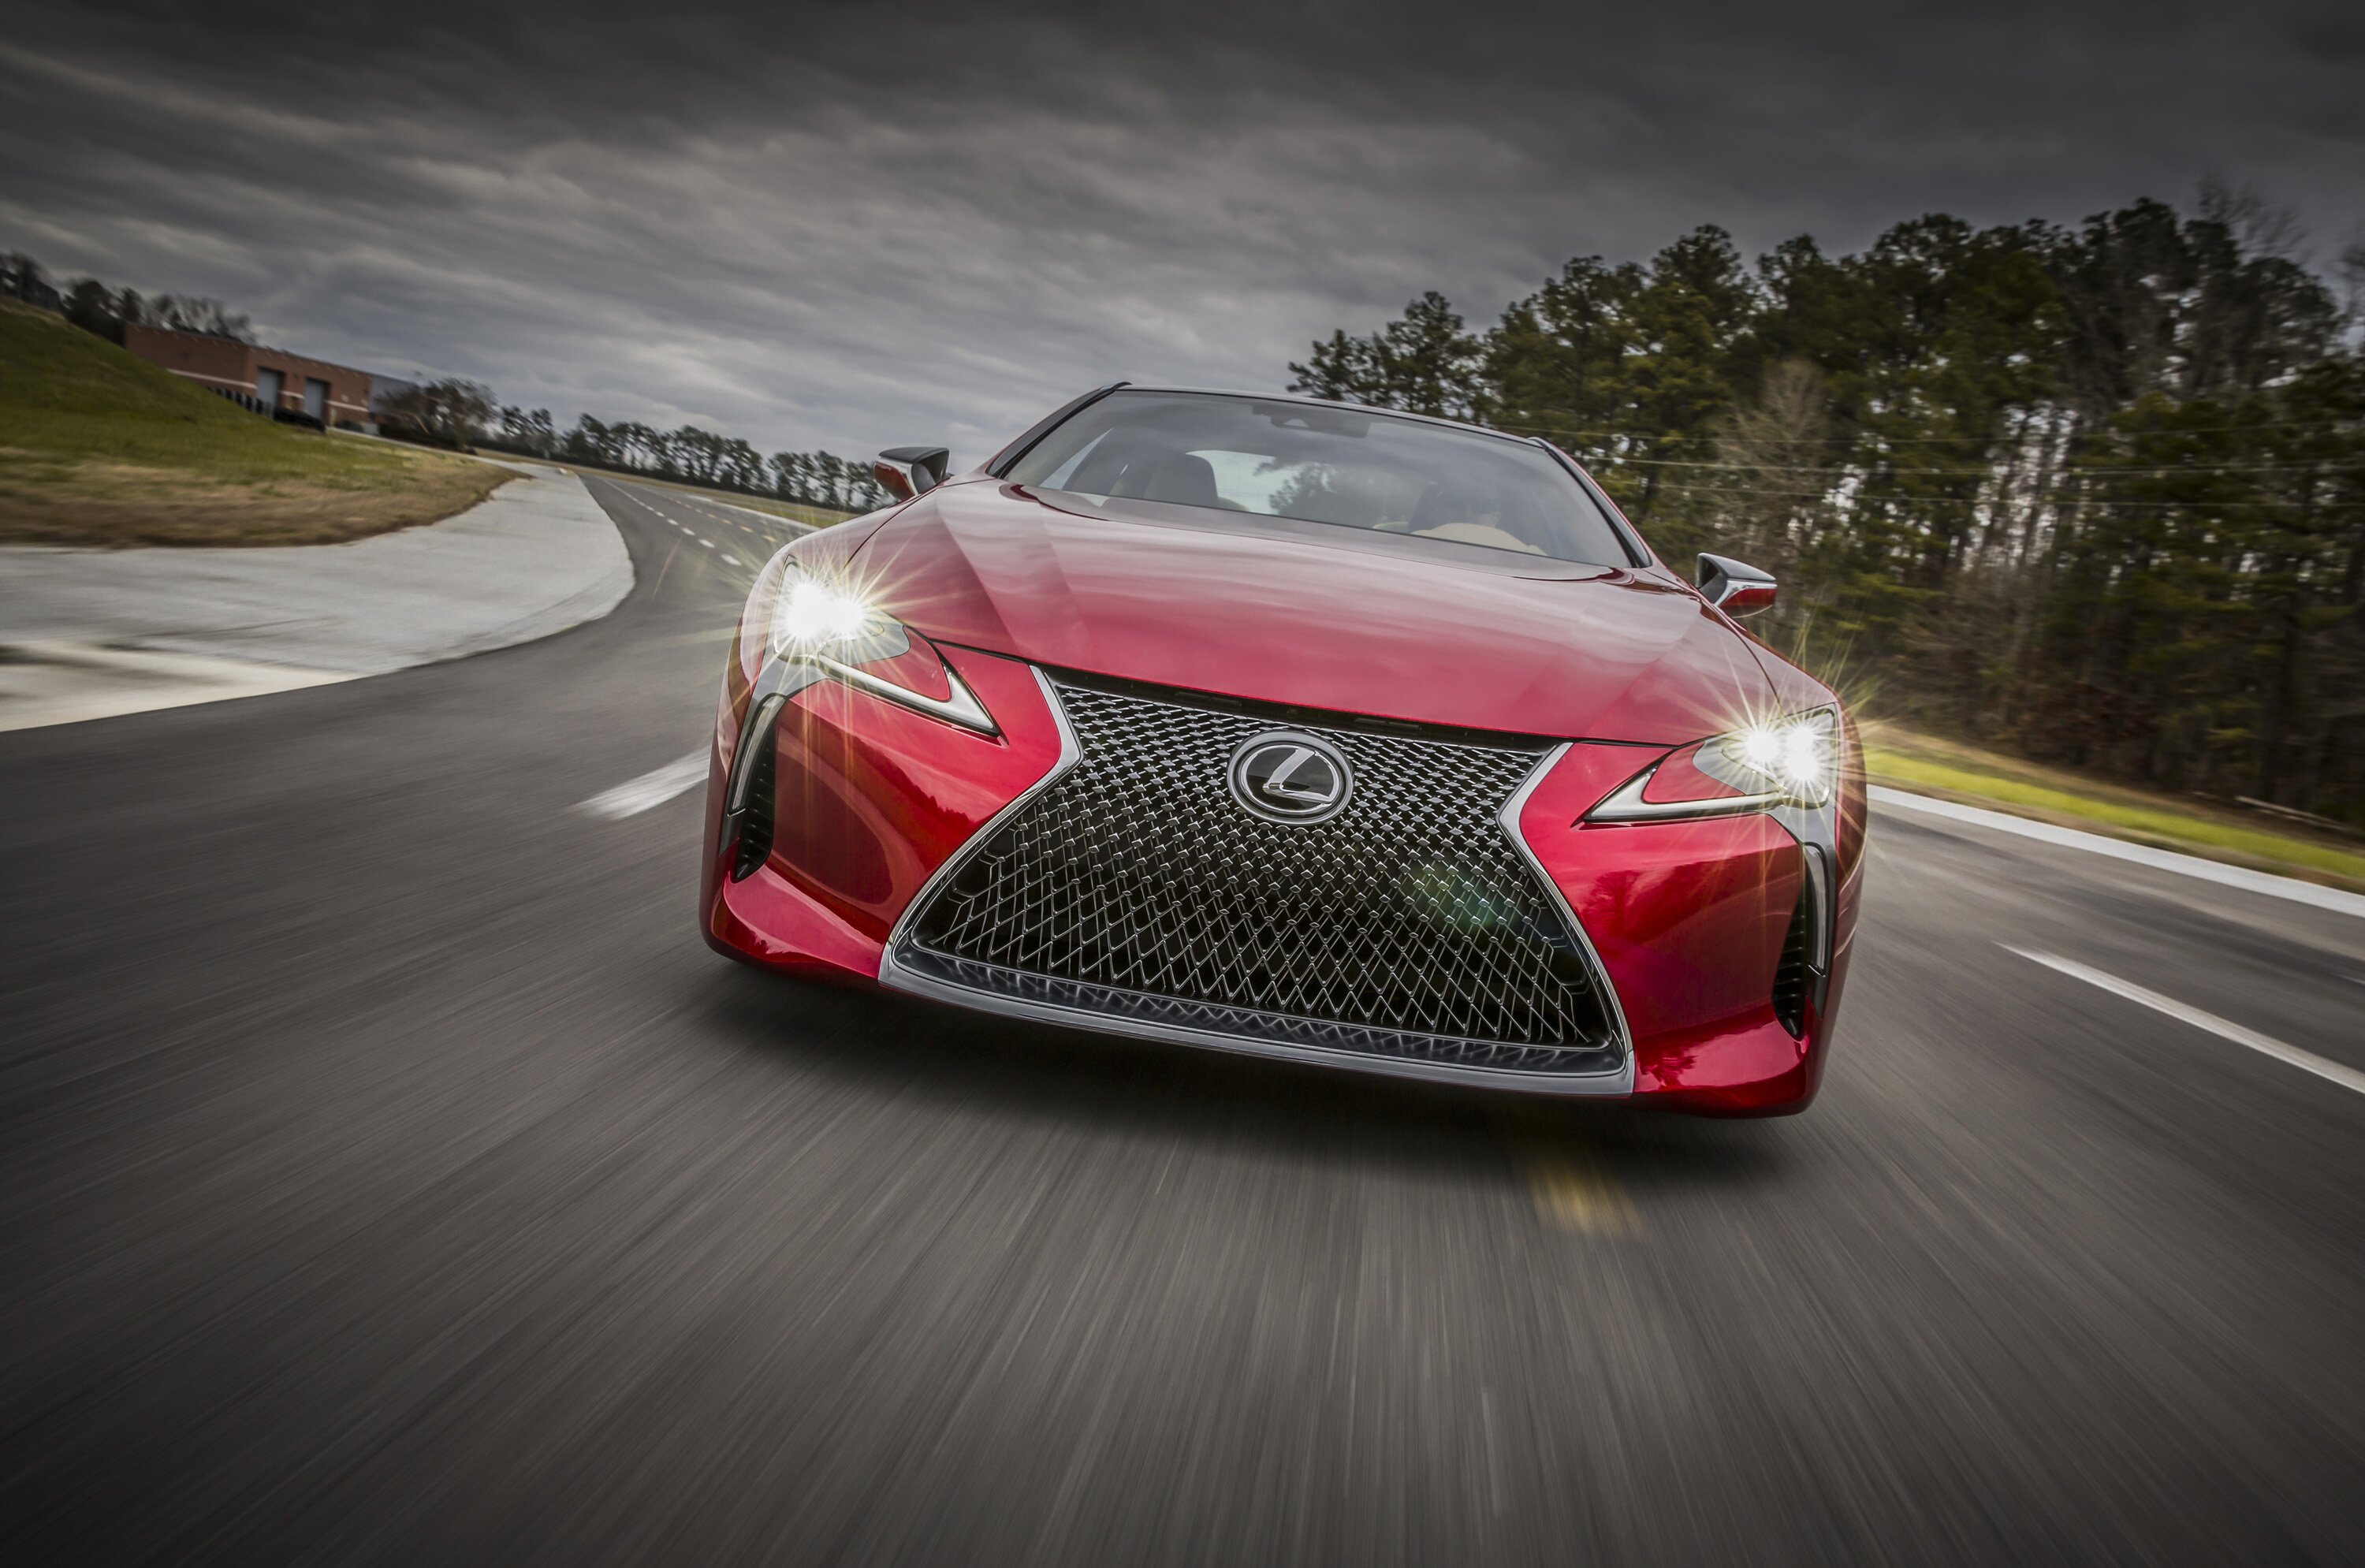 Powering the Lexus LC 500 is a now endangered naturally aspirated V8 engine